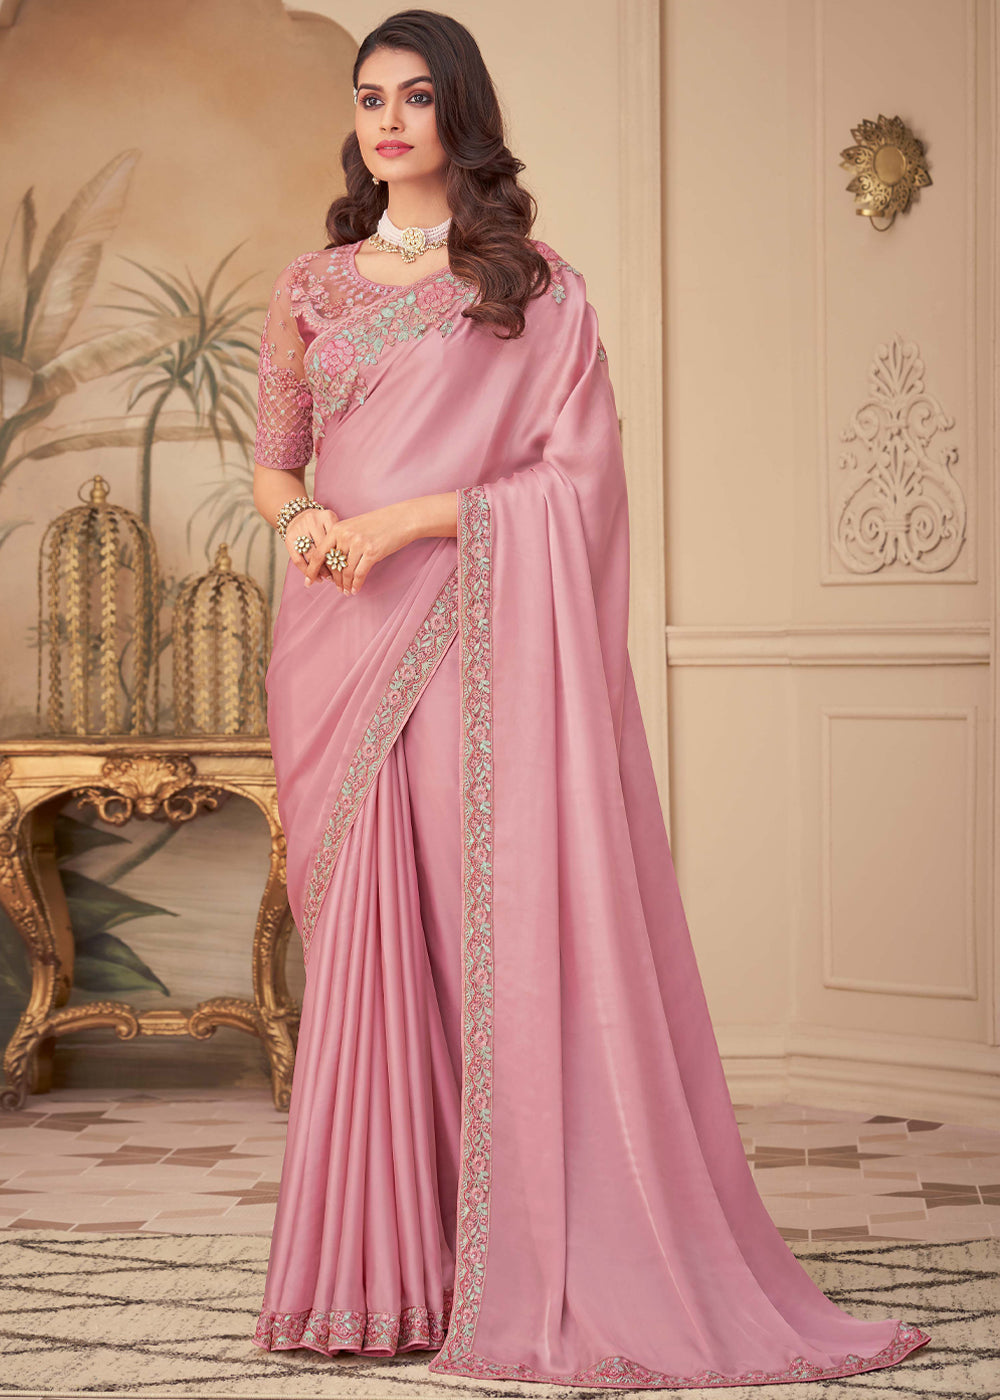 Buy MySilkLove Mandys Pink Georgette Designer Saree with Embroidered Blouse Online